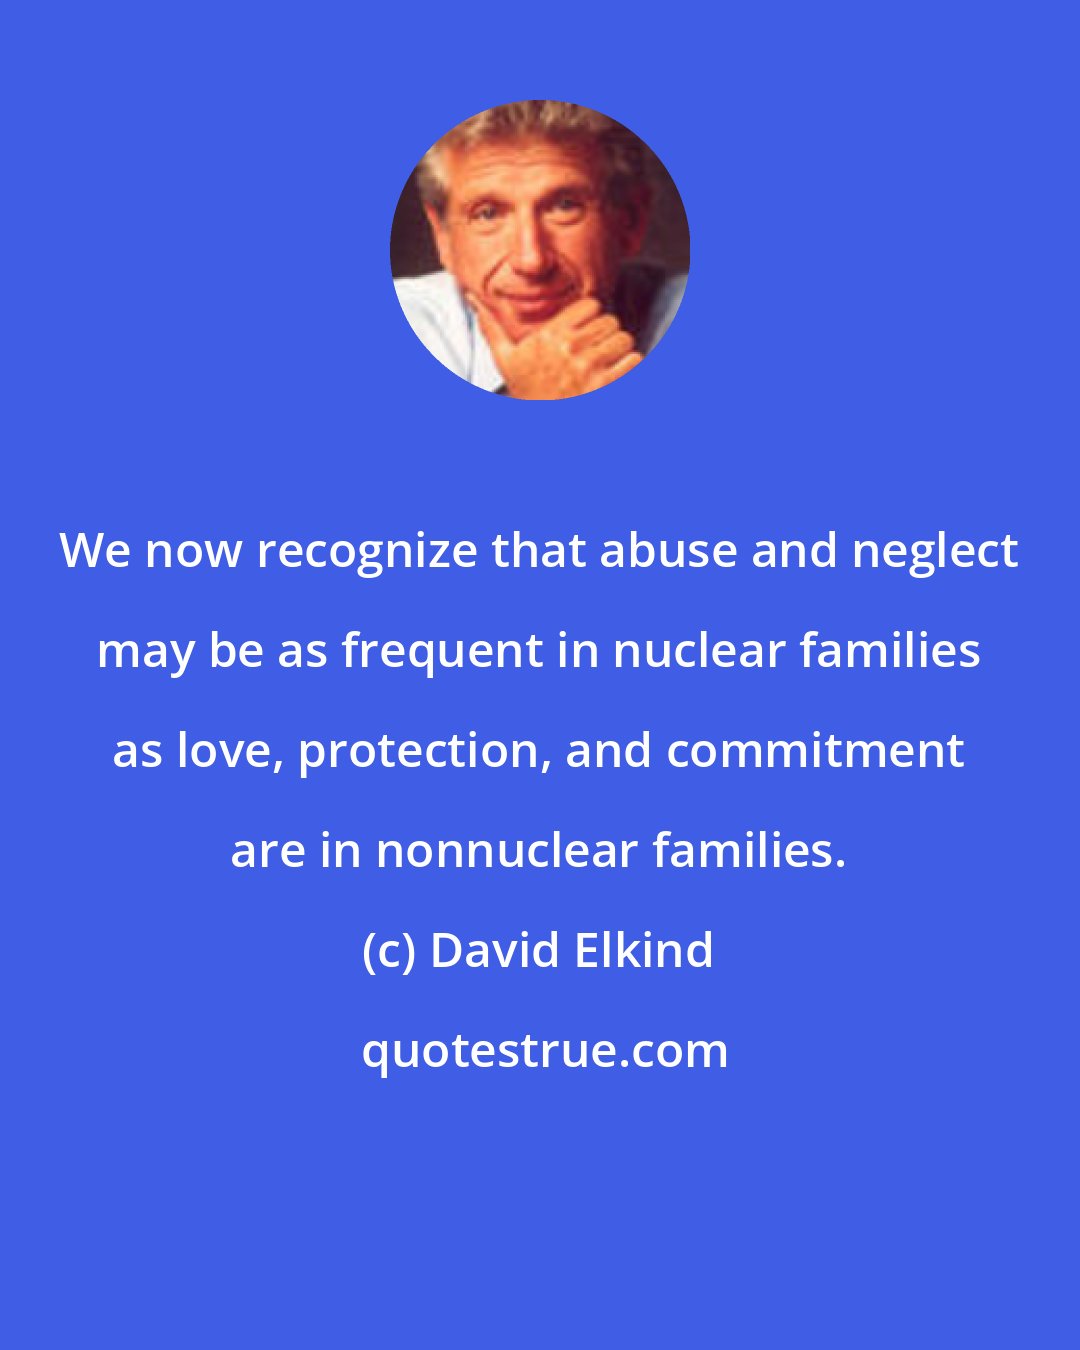 David Elkind: We now recognize that abuse and neglect may be as frequent in nuclear families as love, protection, and commitment are in nonnuclear families.